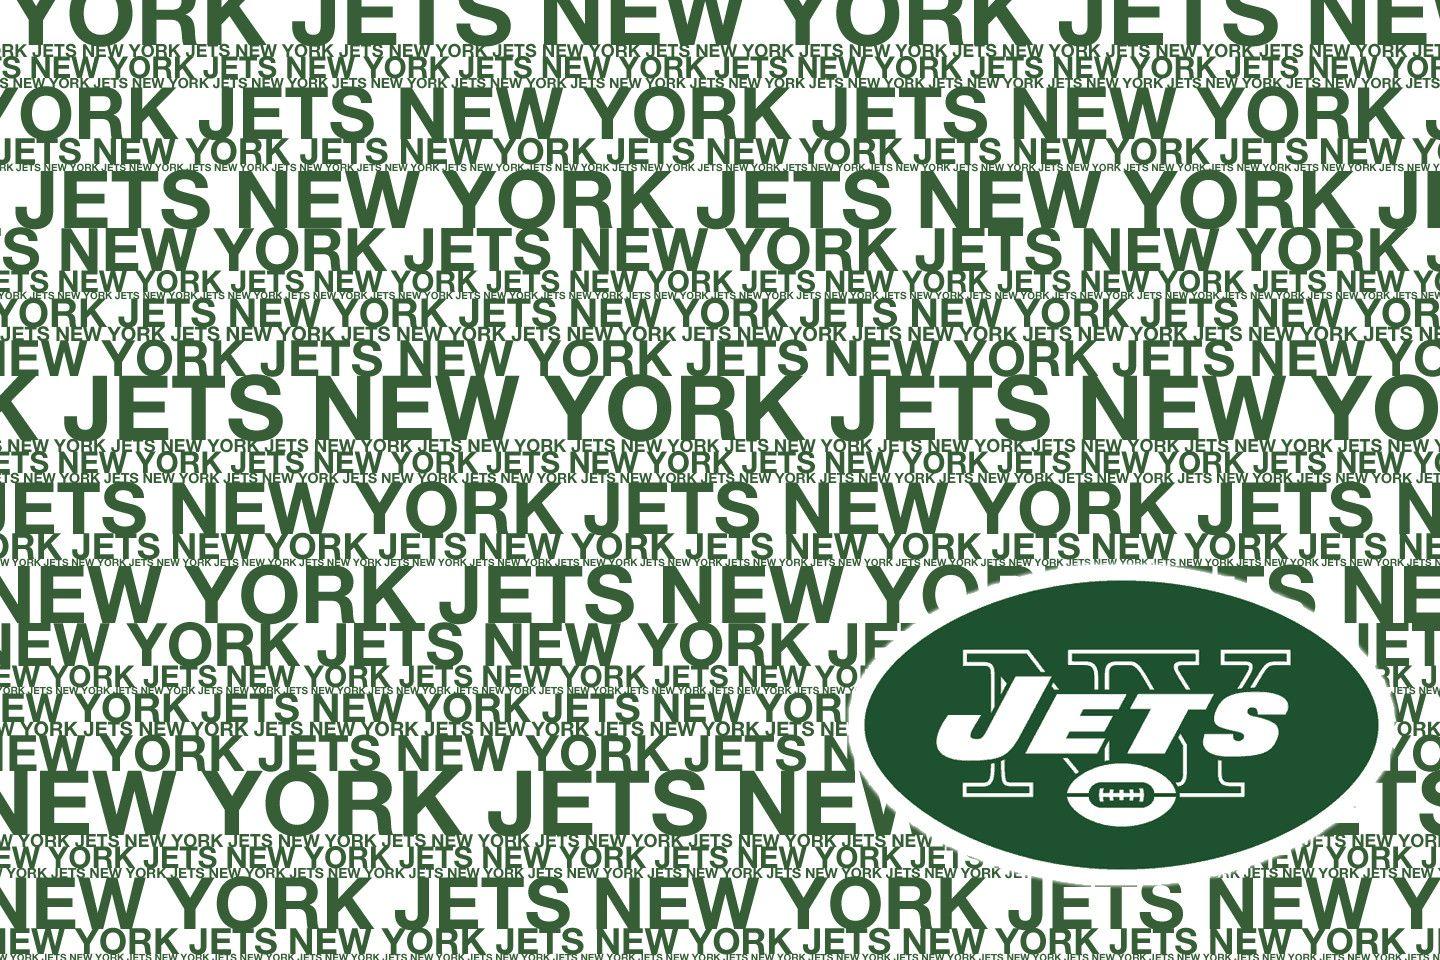 Background Of The Day: New York Jets. New York Jets Wallpaper